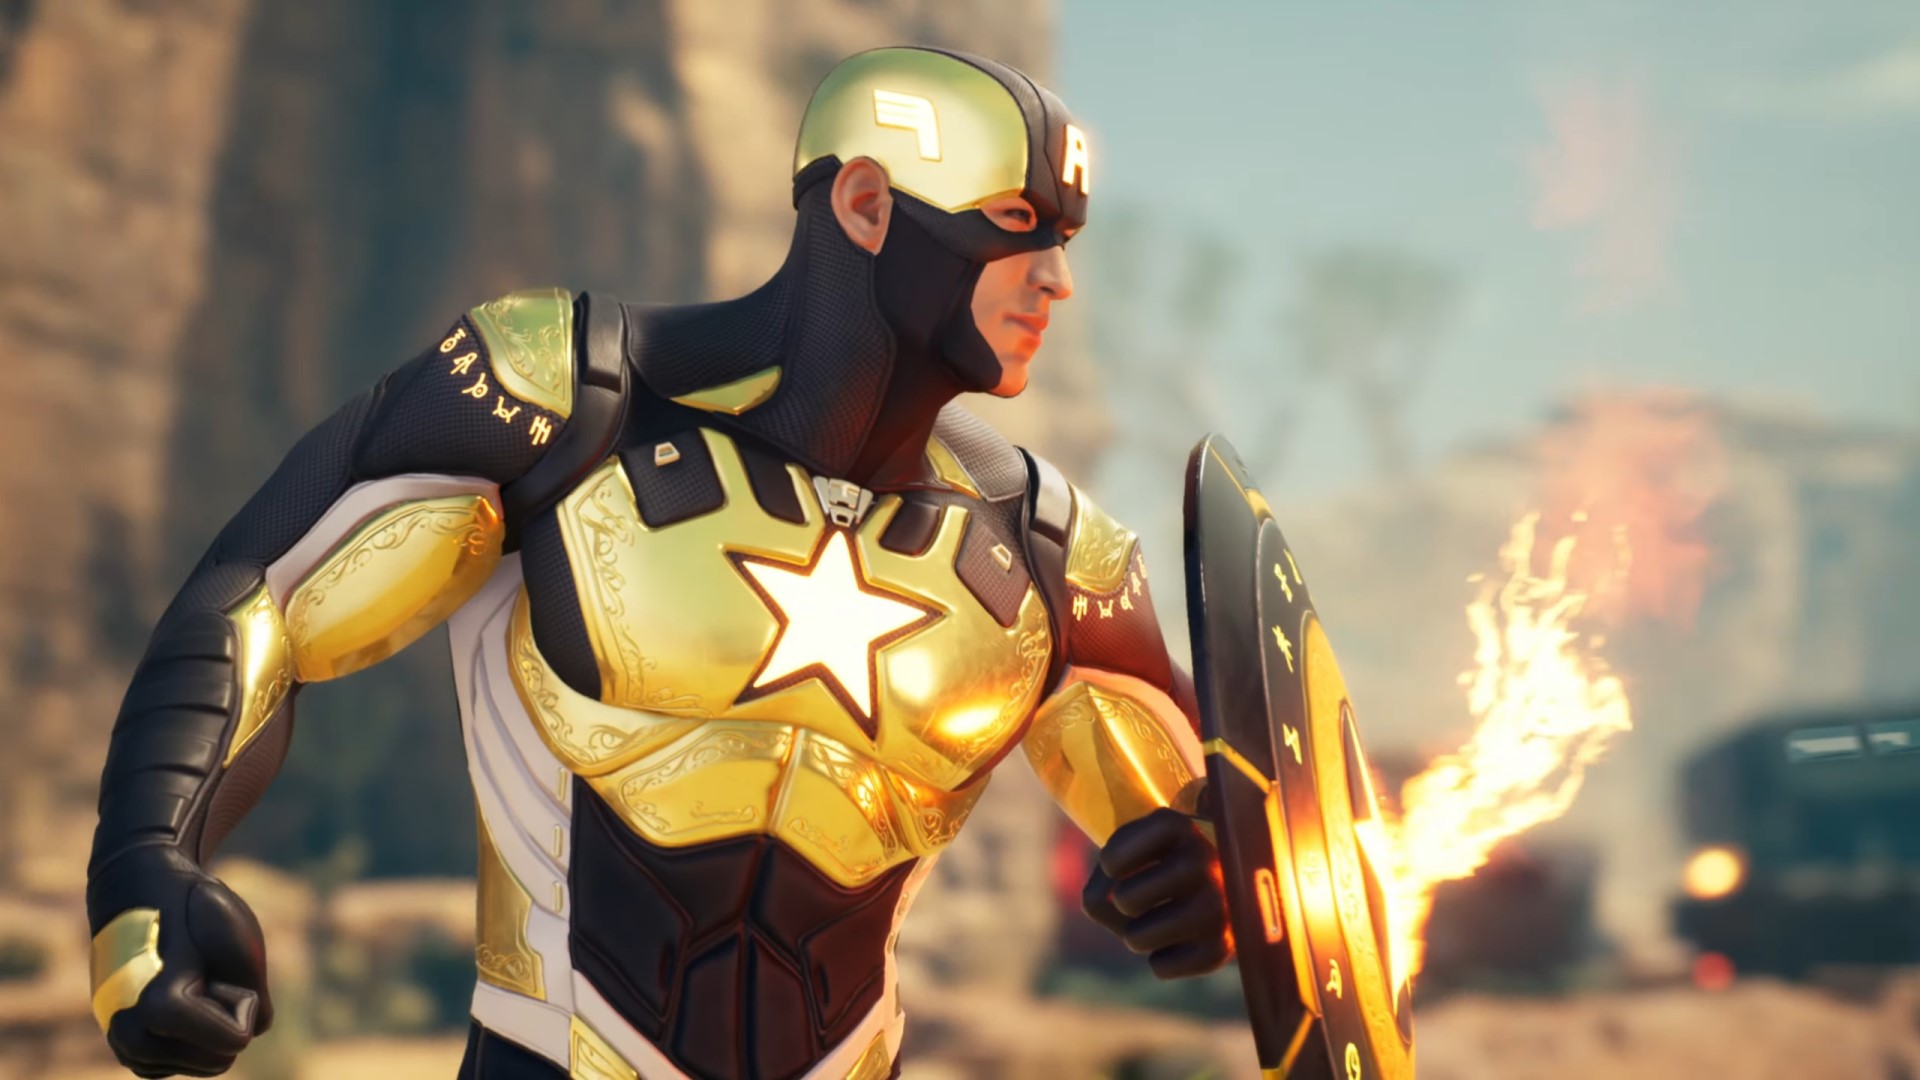 Marvel’s Midnight Suns stream: an “exciting new look” at the game